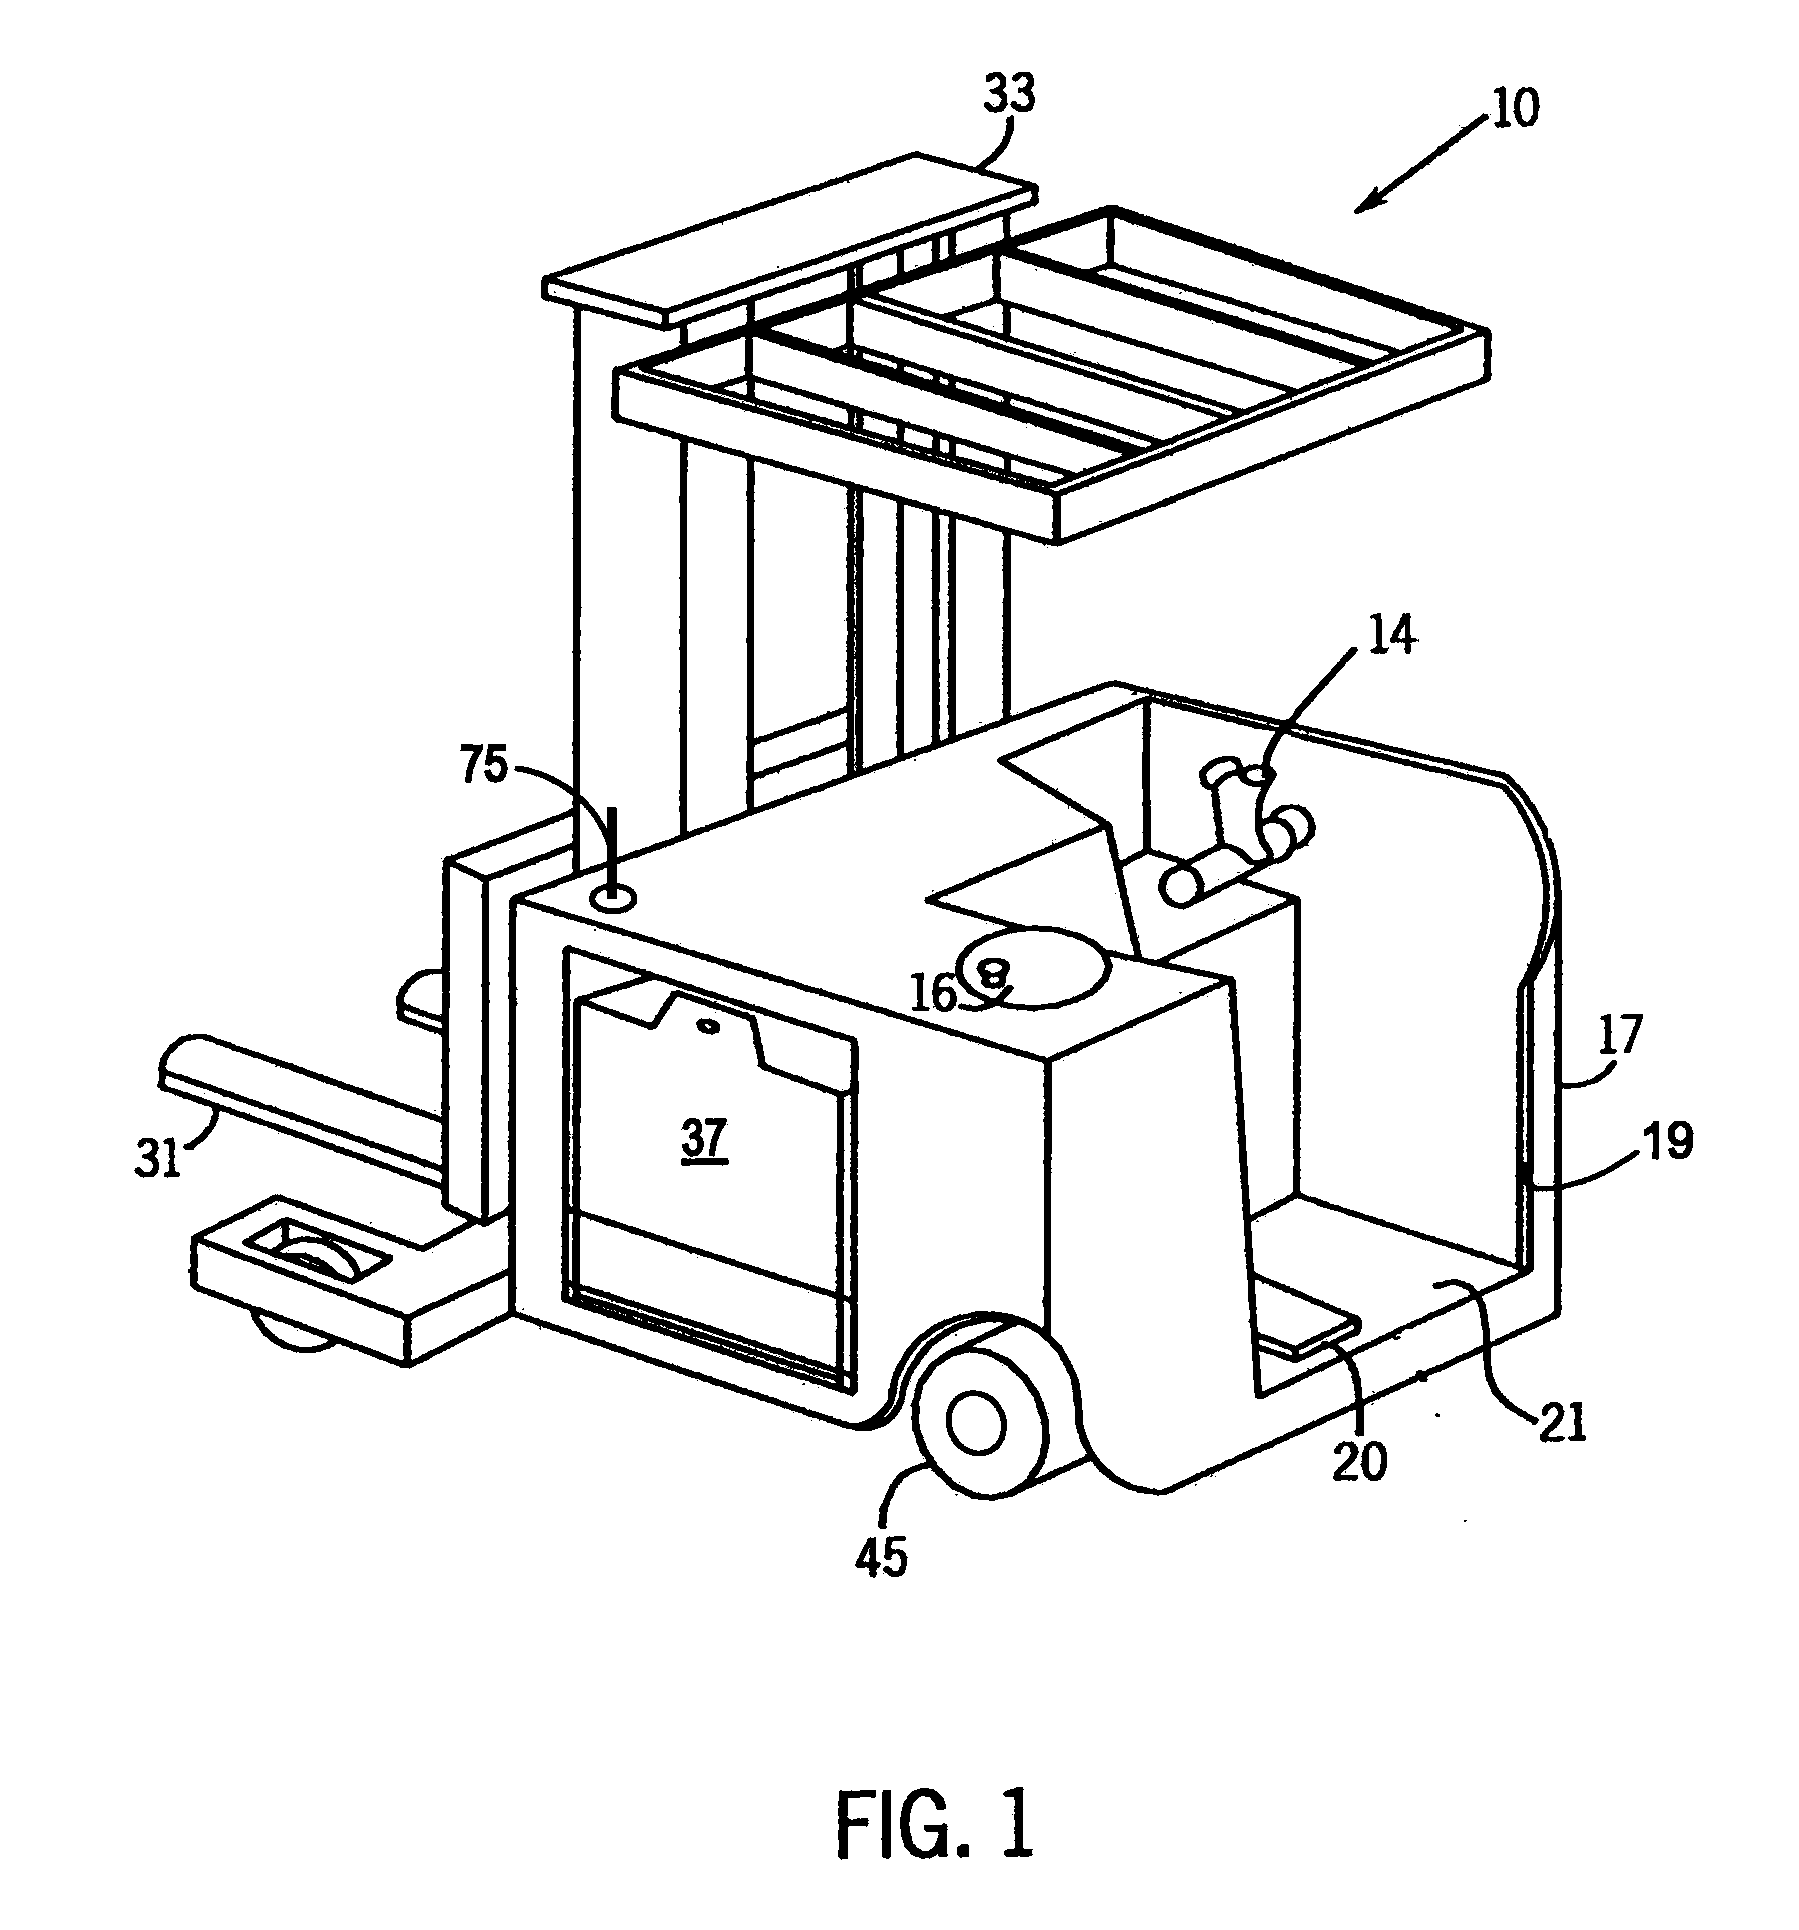 Information reporting system for managing a fleet of an industrial vehicles